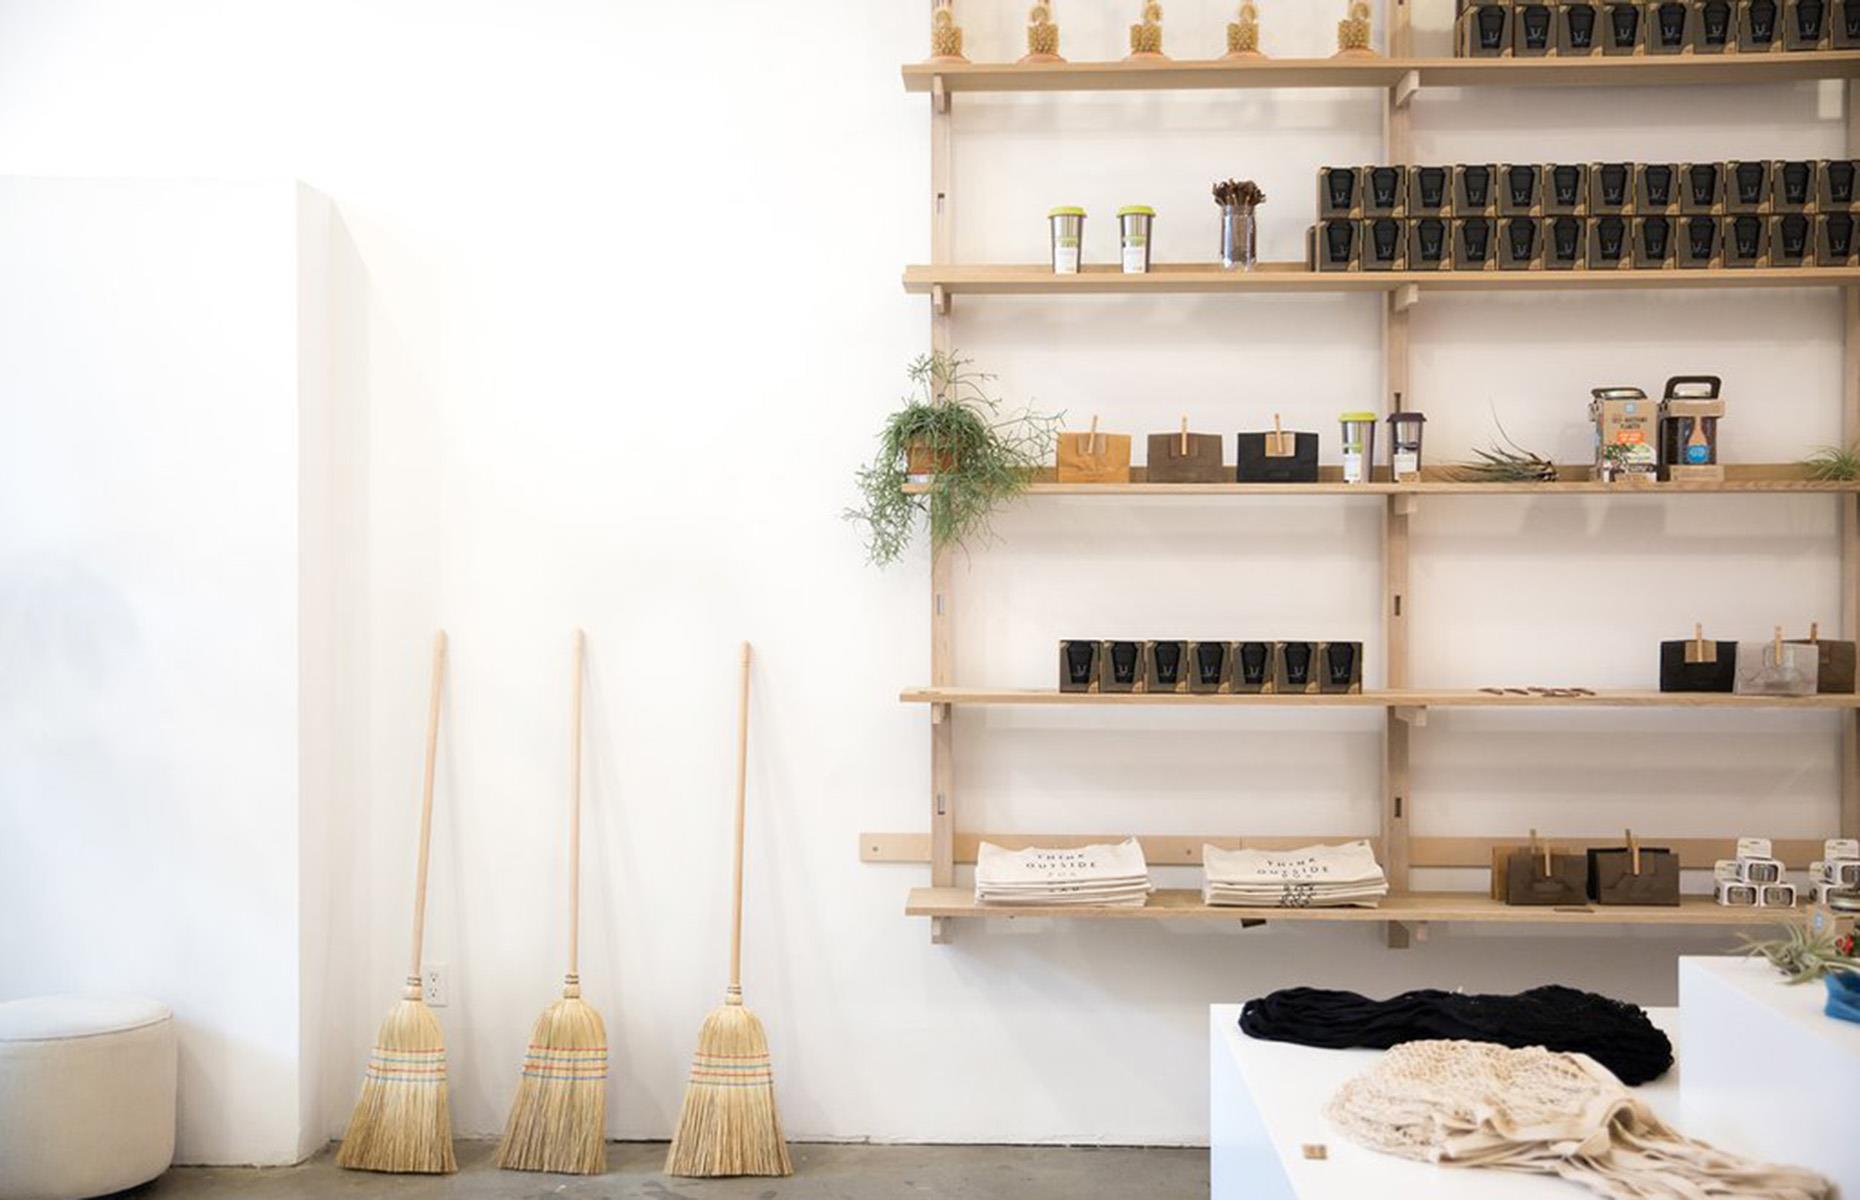 Creating an entirely zero-waste store